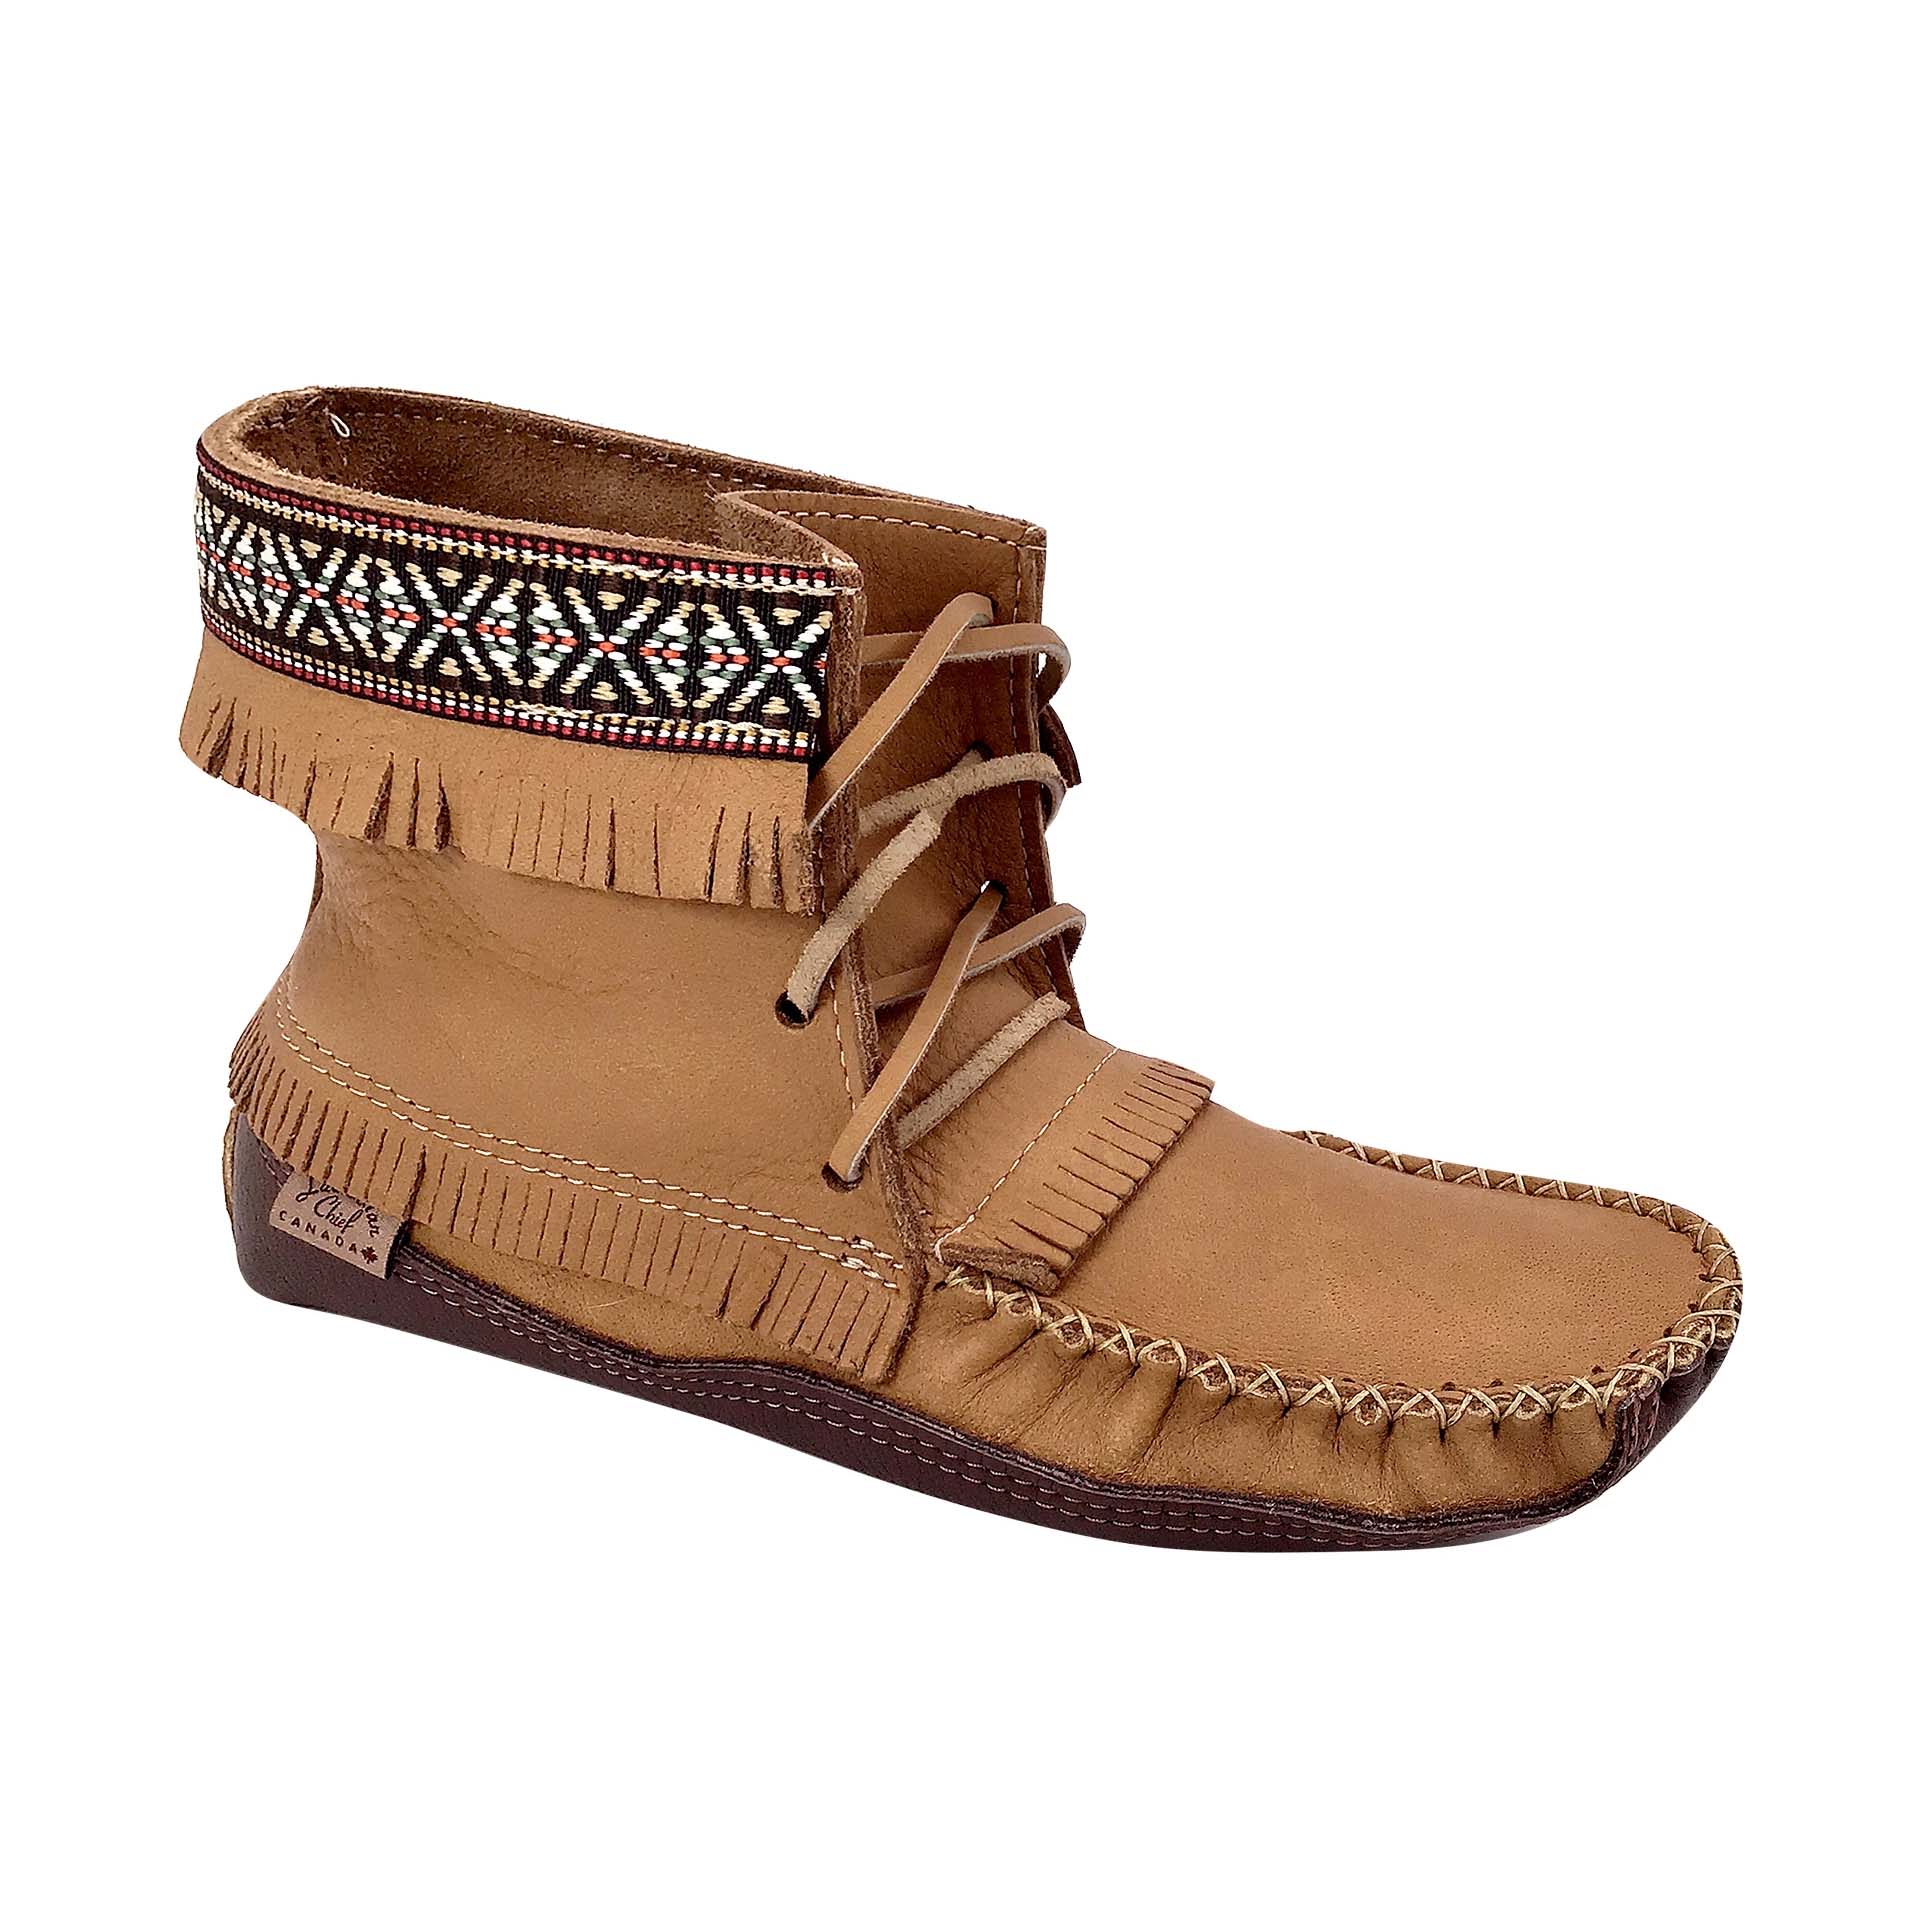 Men's Earthing Moccasin Boots Native Braid Fringed Leather Ankle